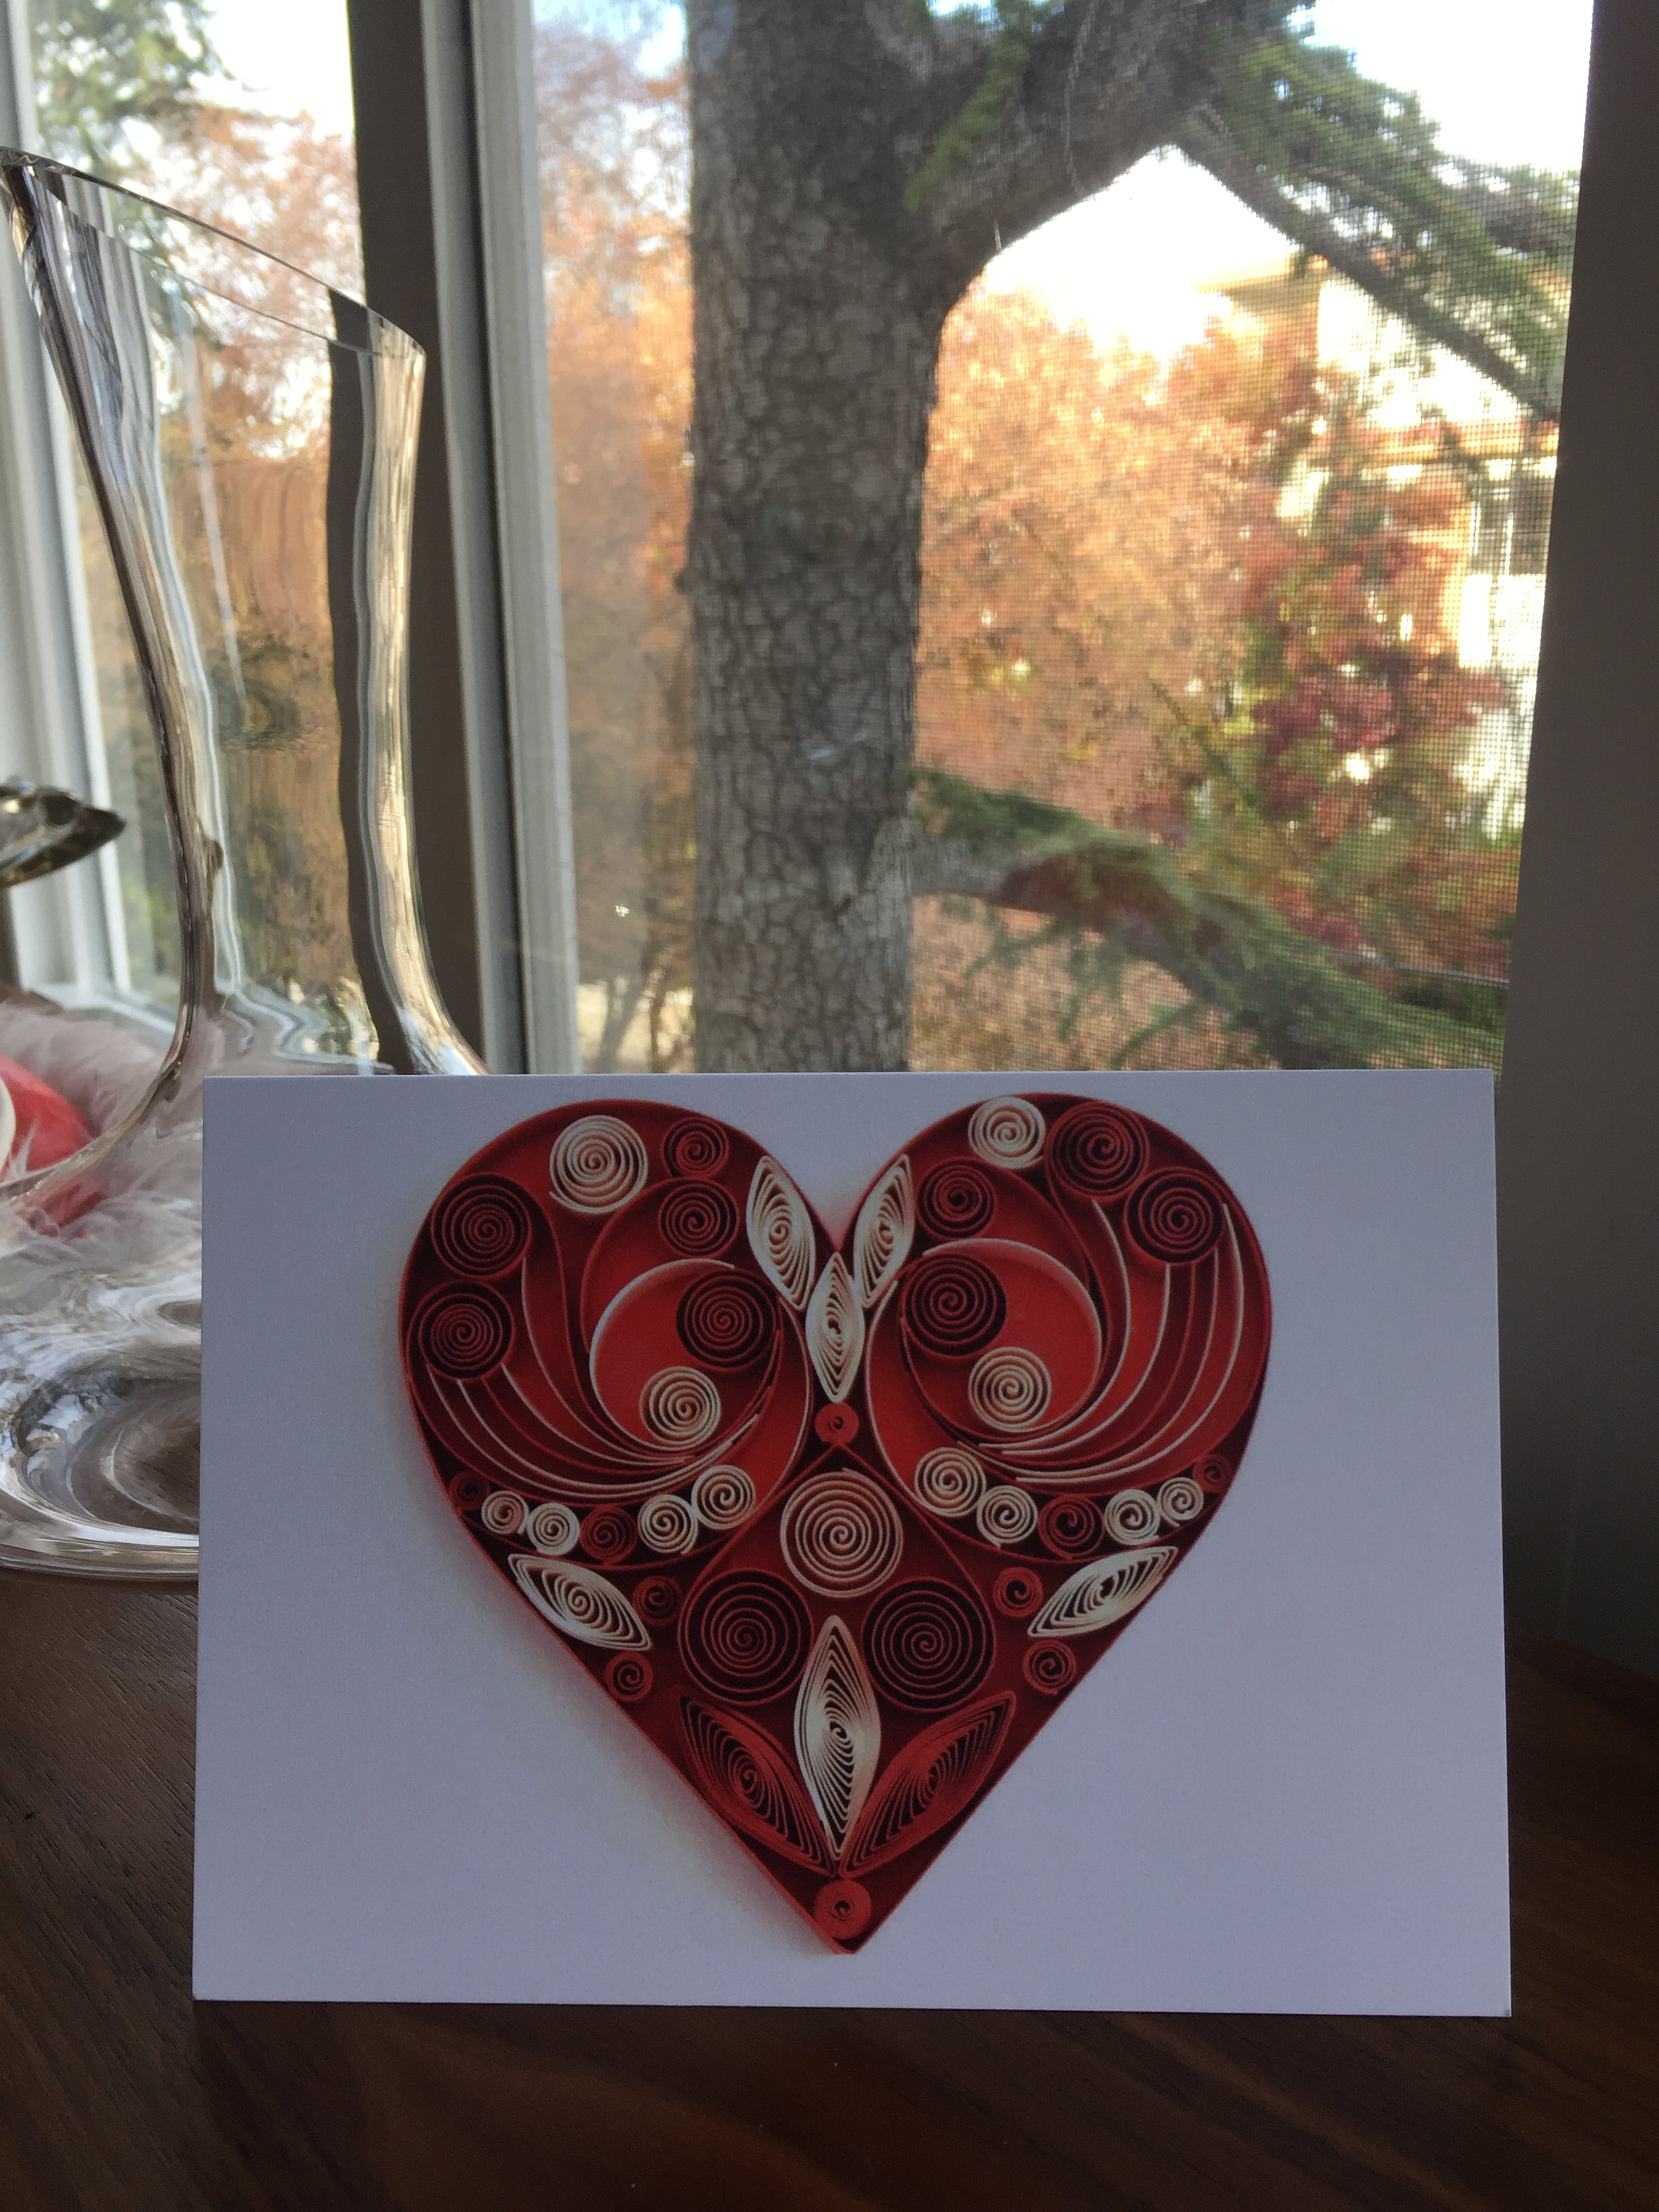 quilling designs for greeting cards